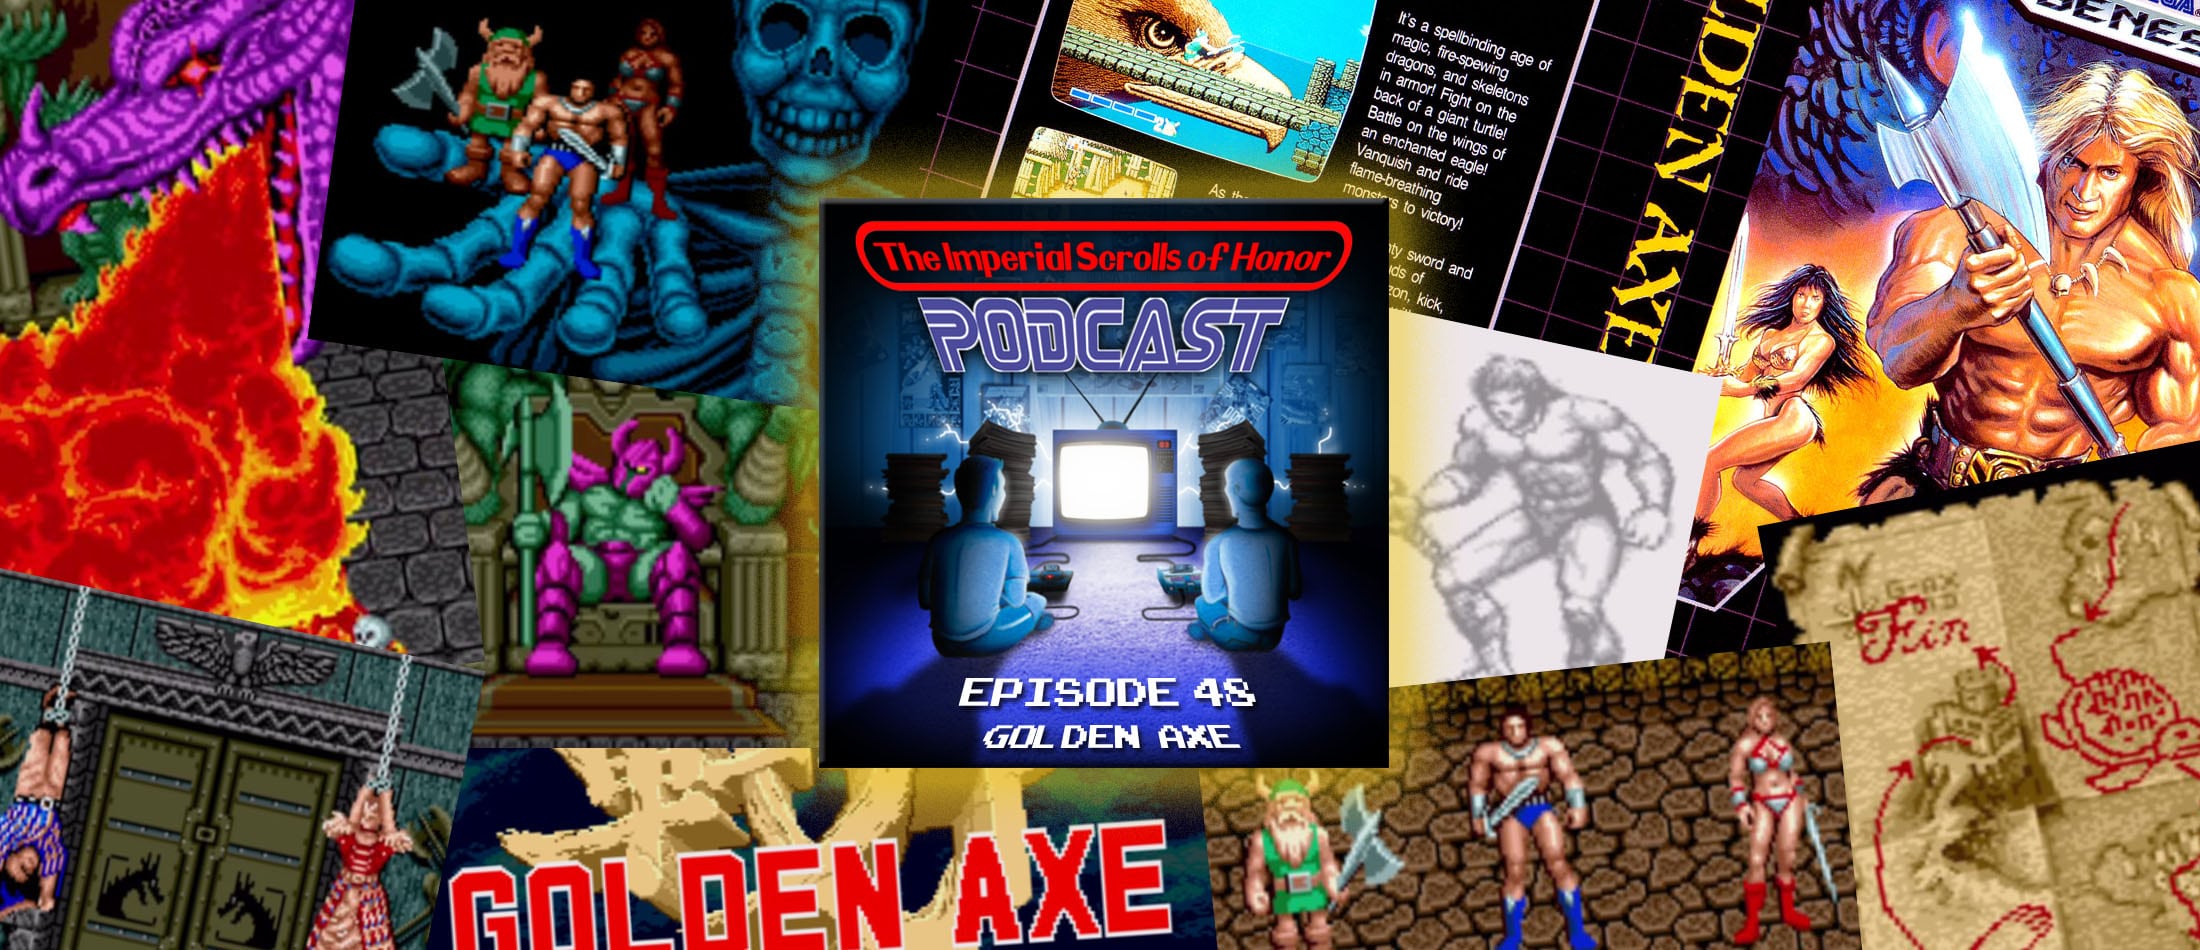 The Imperial Scrolls of Honor Podcast - Ep 48 - Golden Axe (GEN)